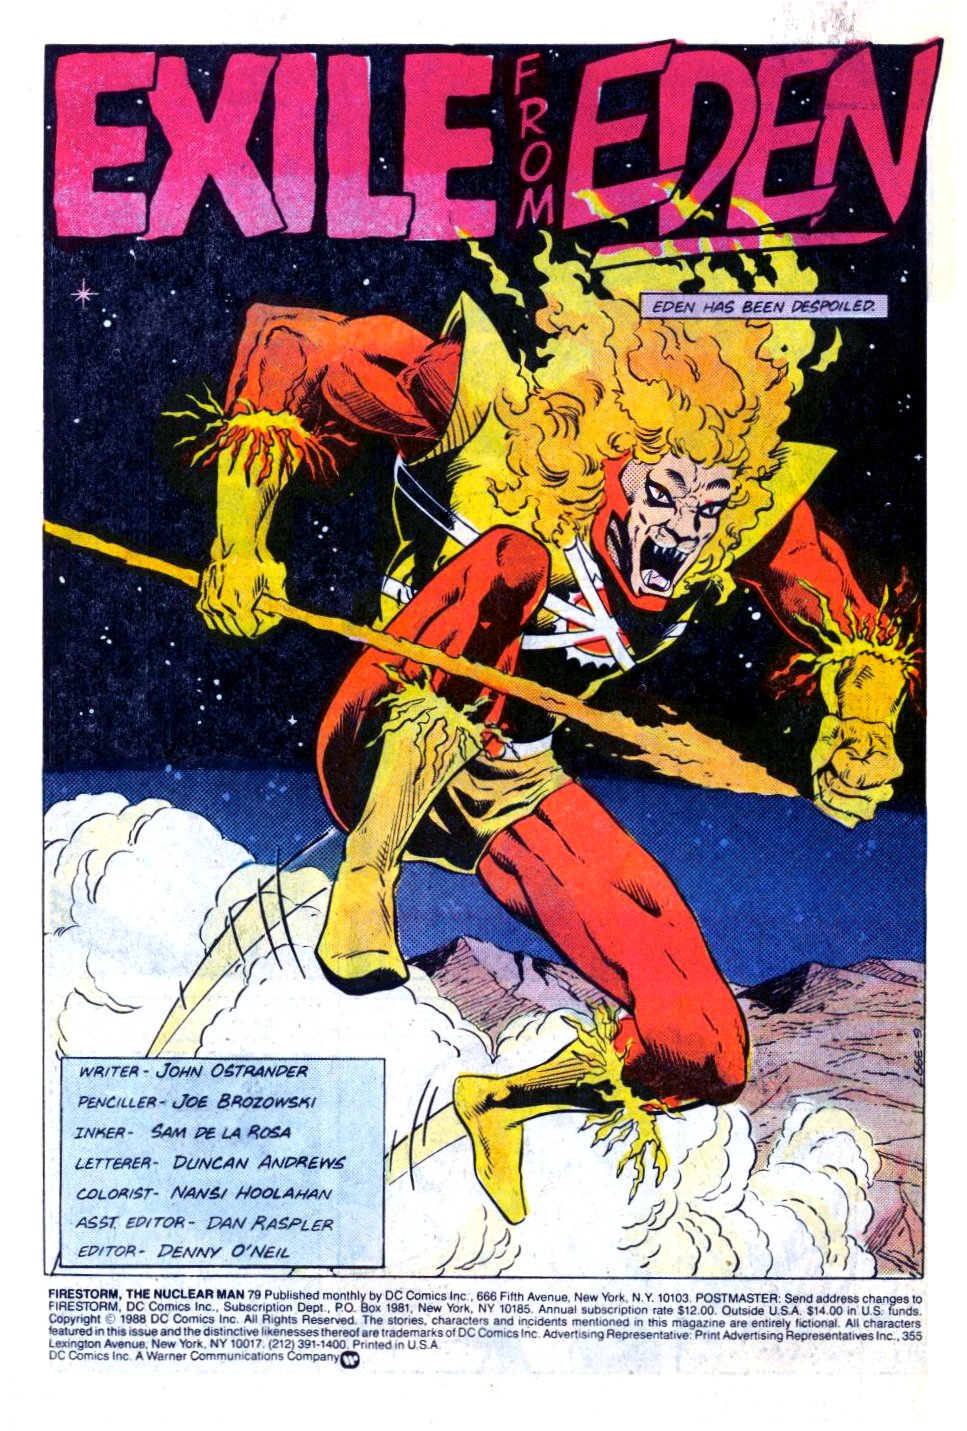 Firestorm, the Nuclear Man Issue #79 #15 - English 2